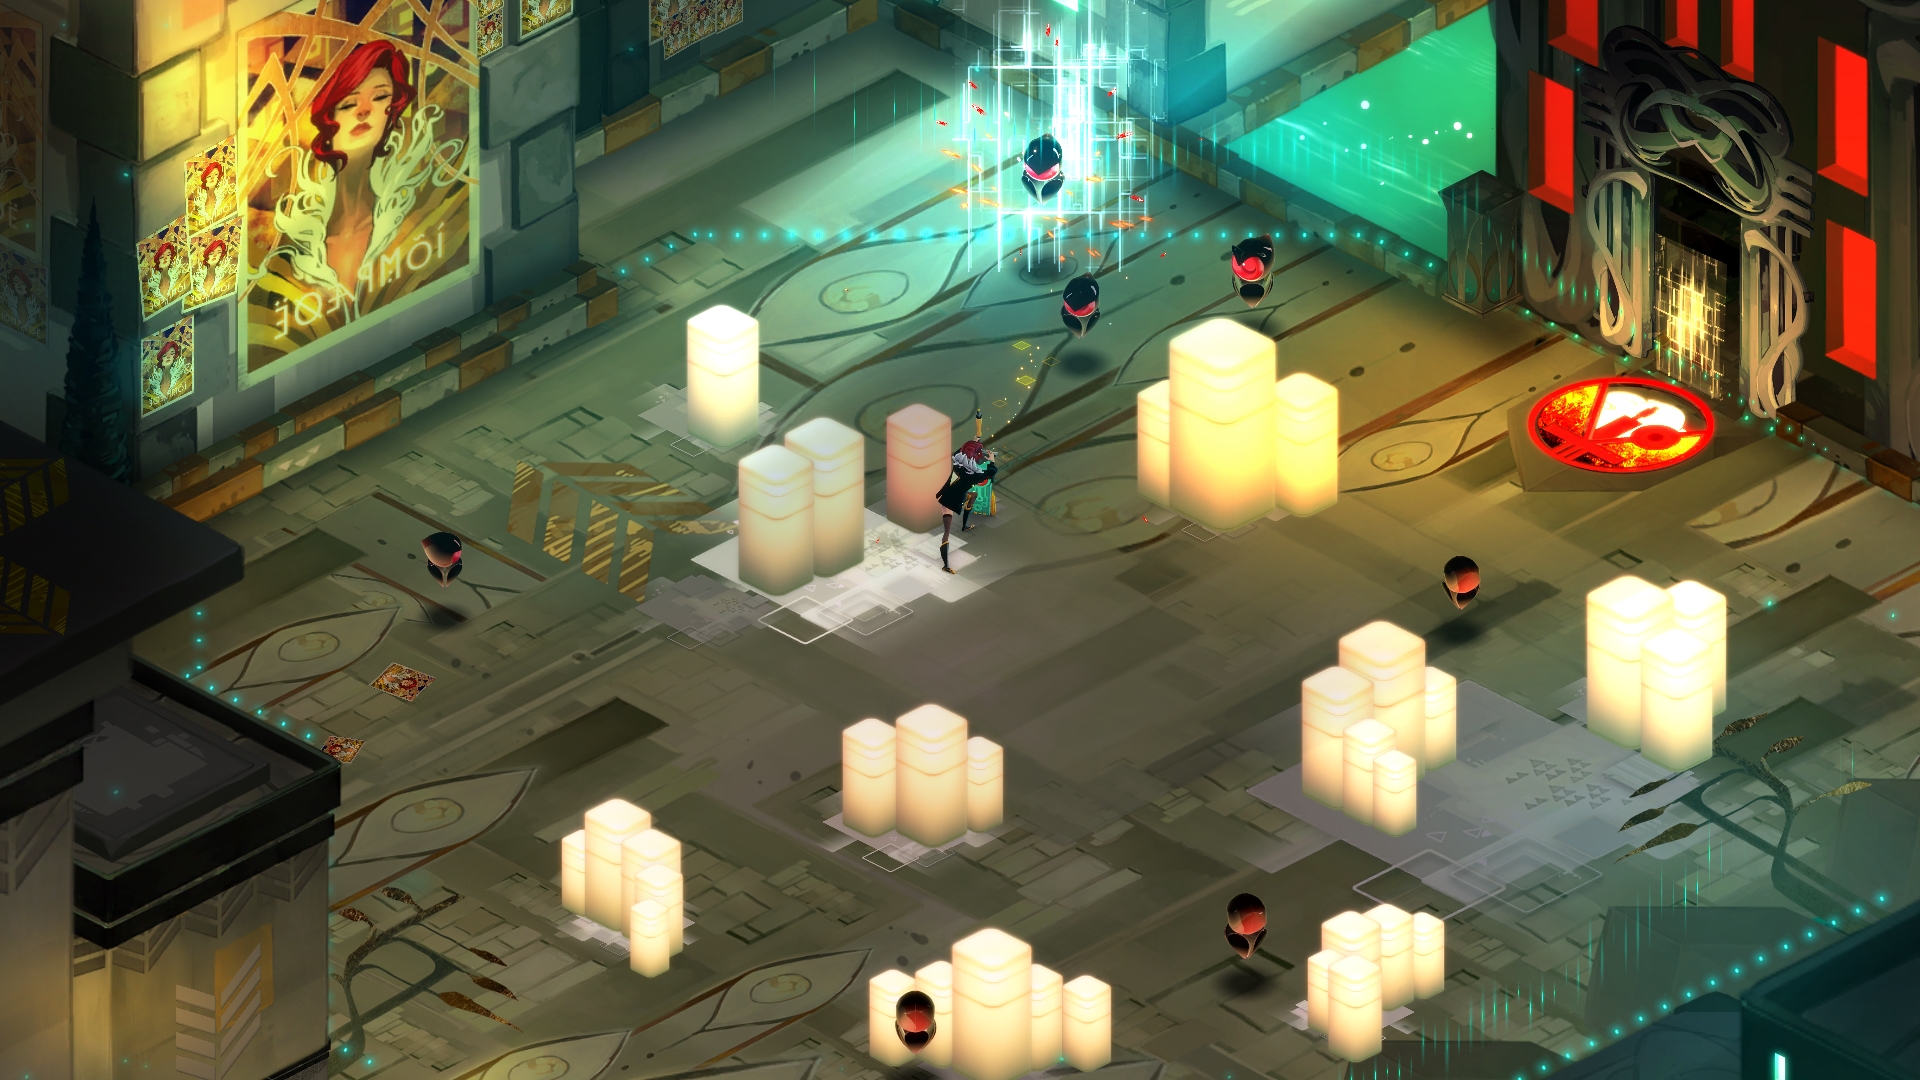 HD wallpaper of Transistor game featuring an isometric view of a character amidst a futuristic cityscape and luminescent pillars.